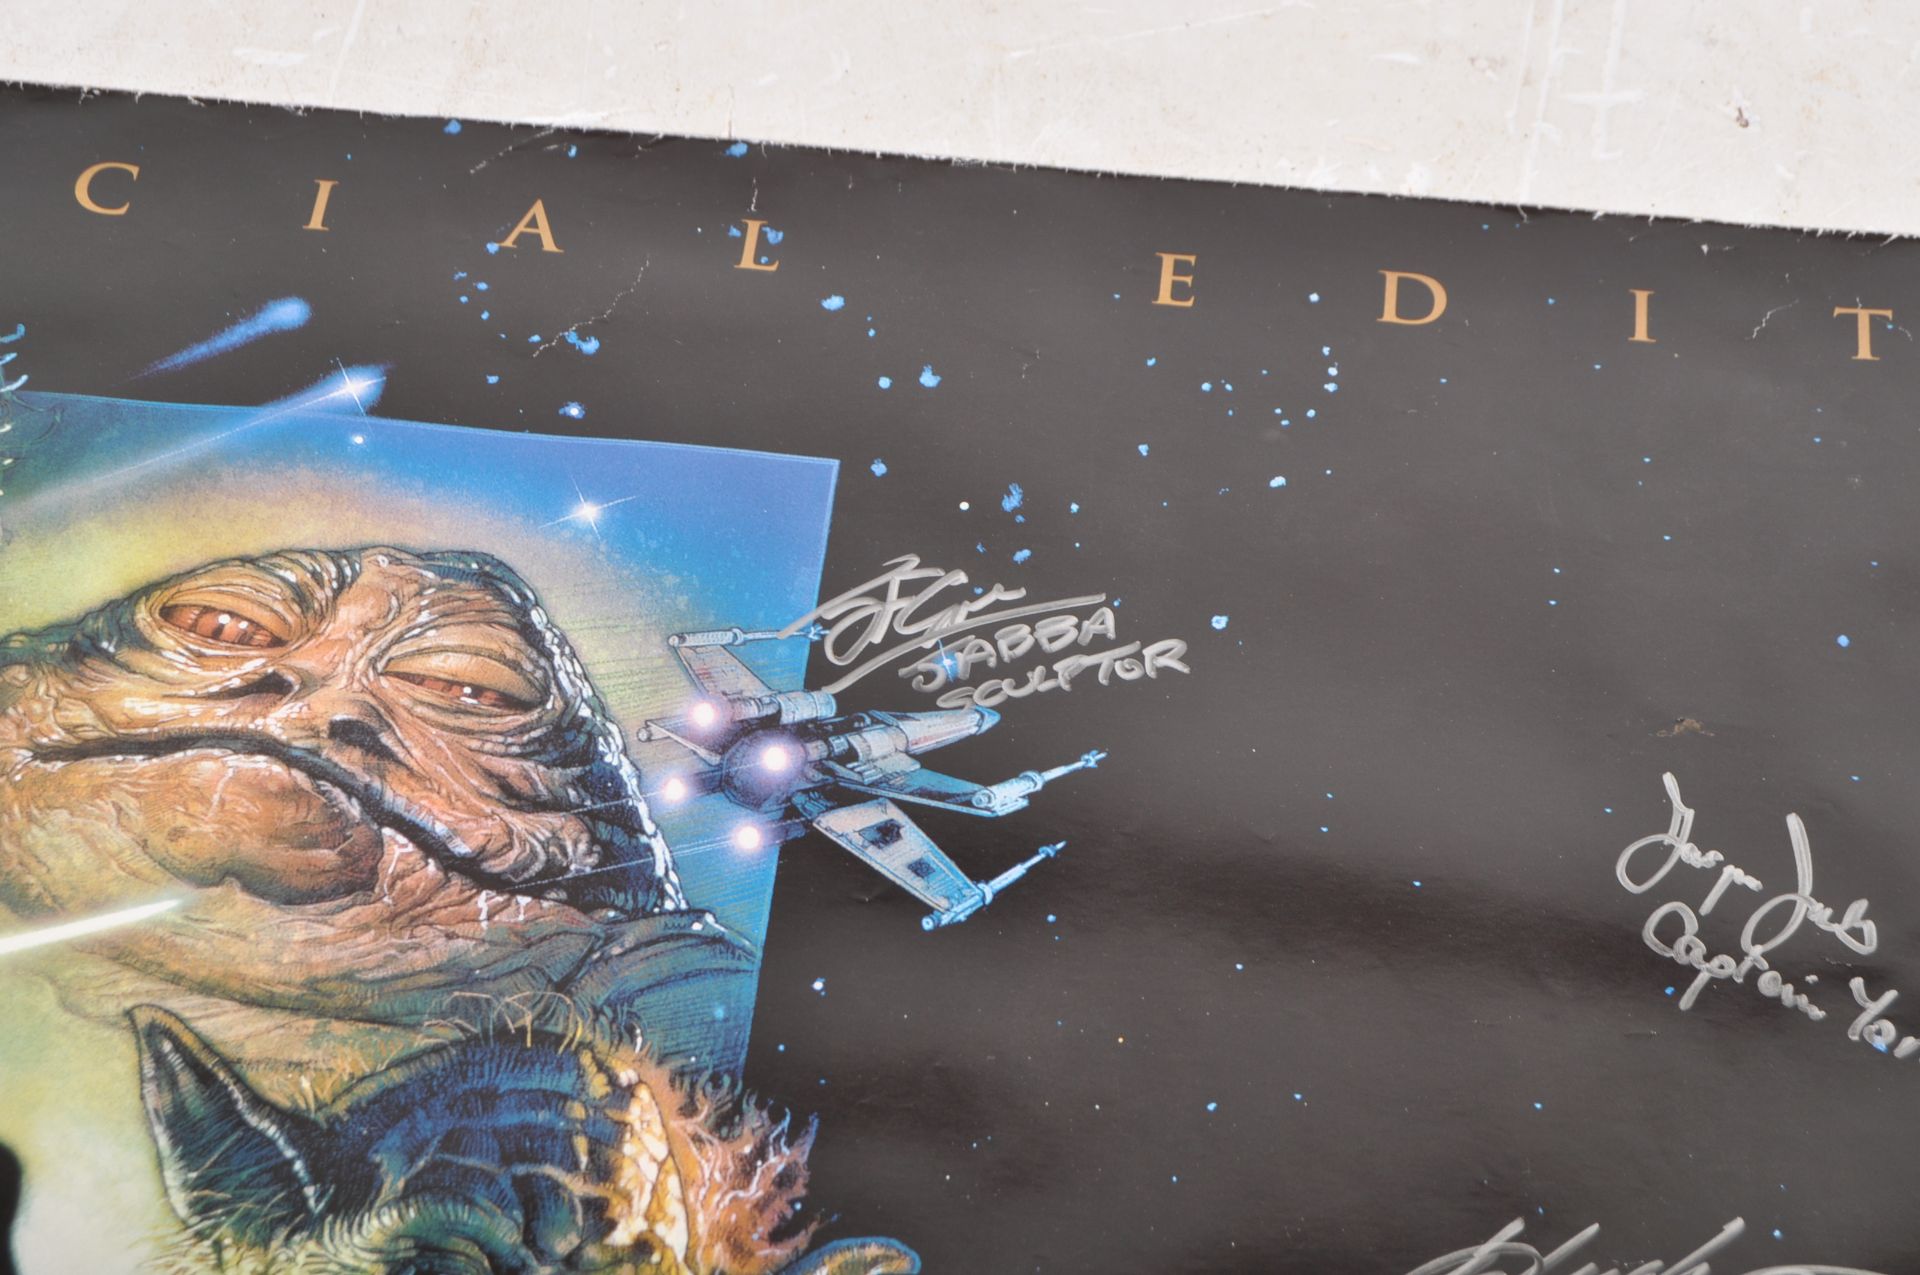 STAR WARS - RETURN OF THE JEDI - CAST SIGNED POSTER X24 - Image 7 of 7